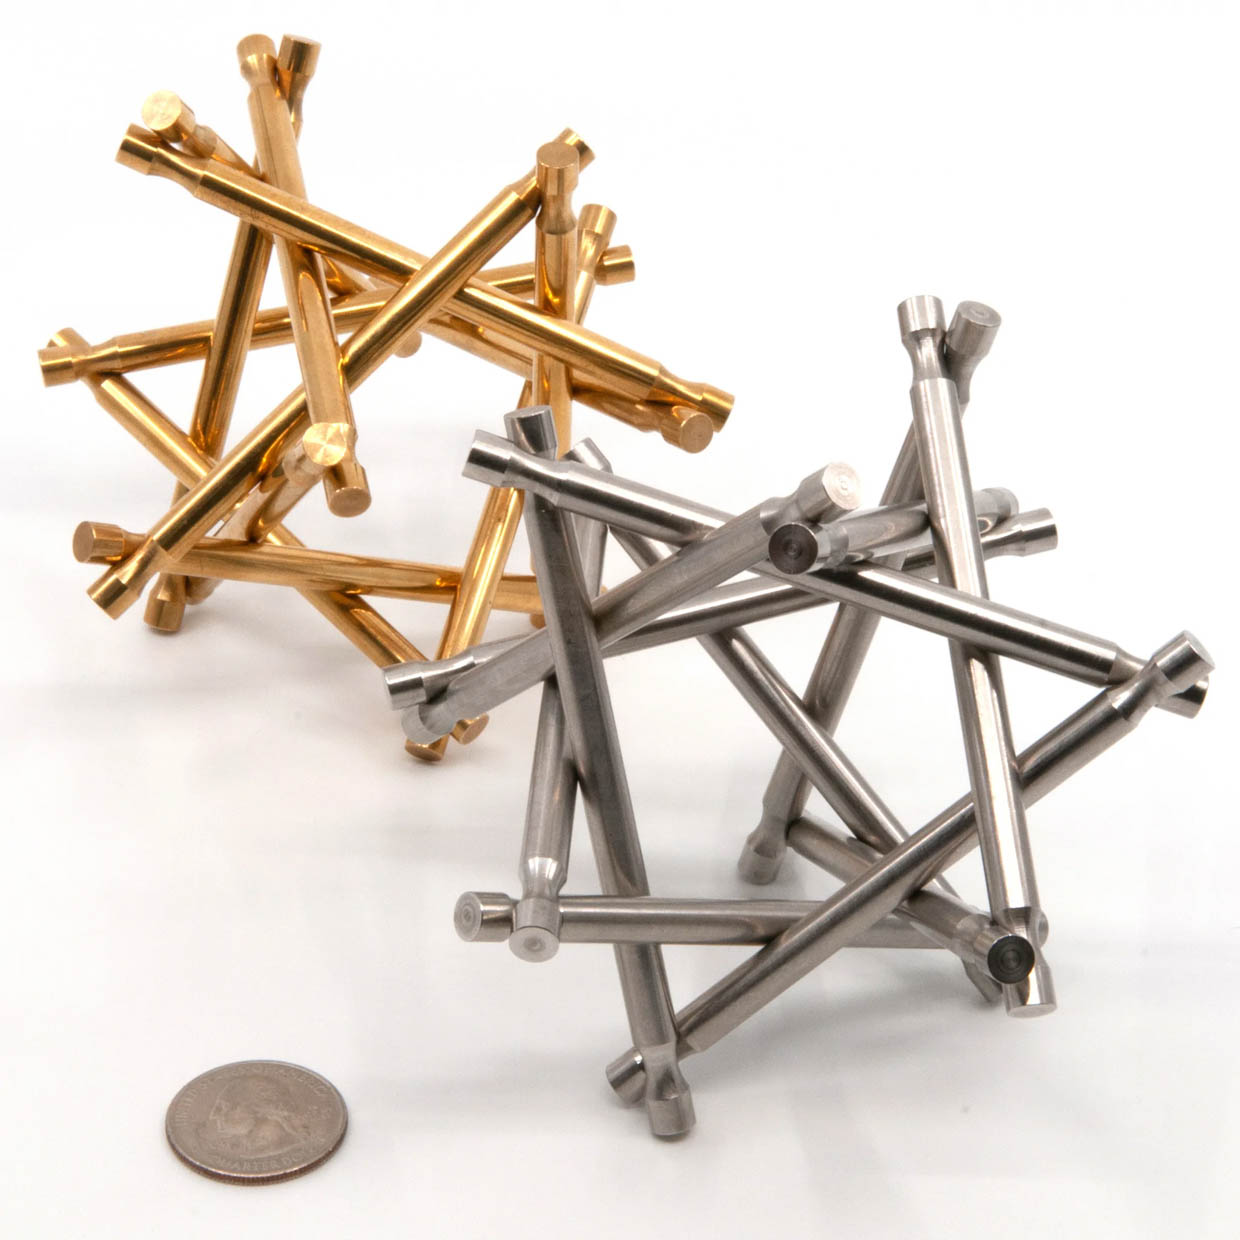 Two Brass Monkeys Puzzles